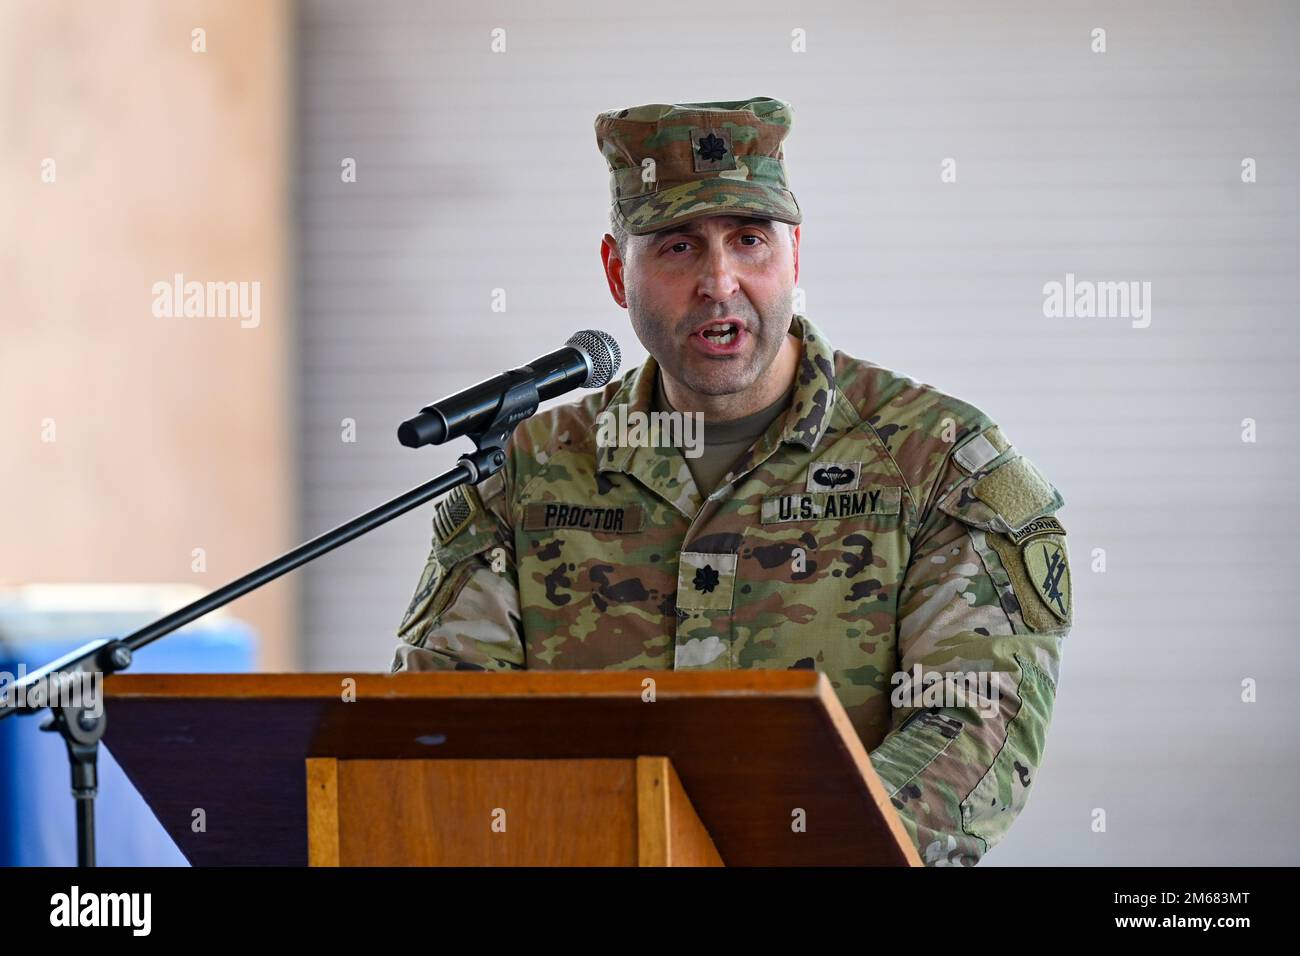 U.S. Army Lt. Col. Adam Proctor, 403rd Civil Affairs Battalion (CAB) commander and outgoing commander of Civil Affairs East and West Africa, thanks his Soldiers and welcomes the 411th CAB during a transfer of responsibility ceremony at Camp Lemonnier, Djibouti, April 15, 2022. In support of U.S. Africa Command and Combined Joint Task Force – Horn of Africa, the 411th CAB now has responsibility for two civil affairs companies: Civil Affairs West Africa and Civil Affairs East Africa. Stock Photo